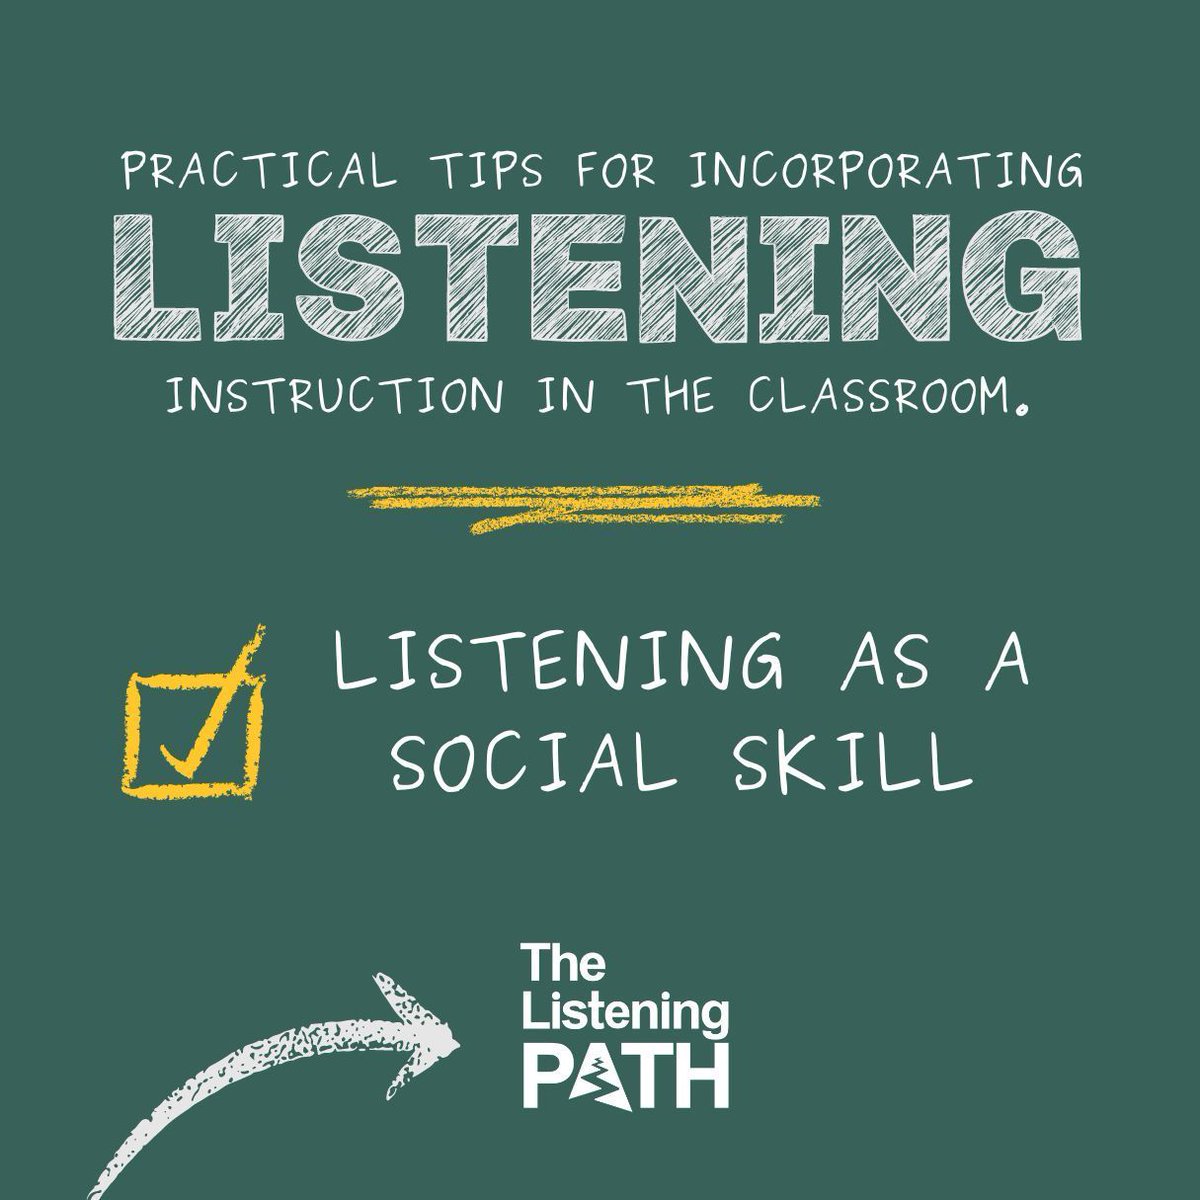 By teaching listening, we foster students' social development, enabling them to navigate diverse social situations and build meaningful relationships.
#socialskills #listeningskills #educators #teachers #classroomideas